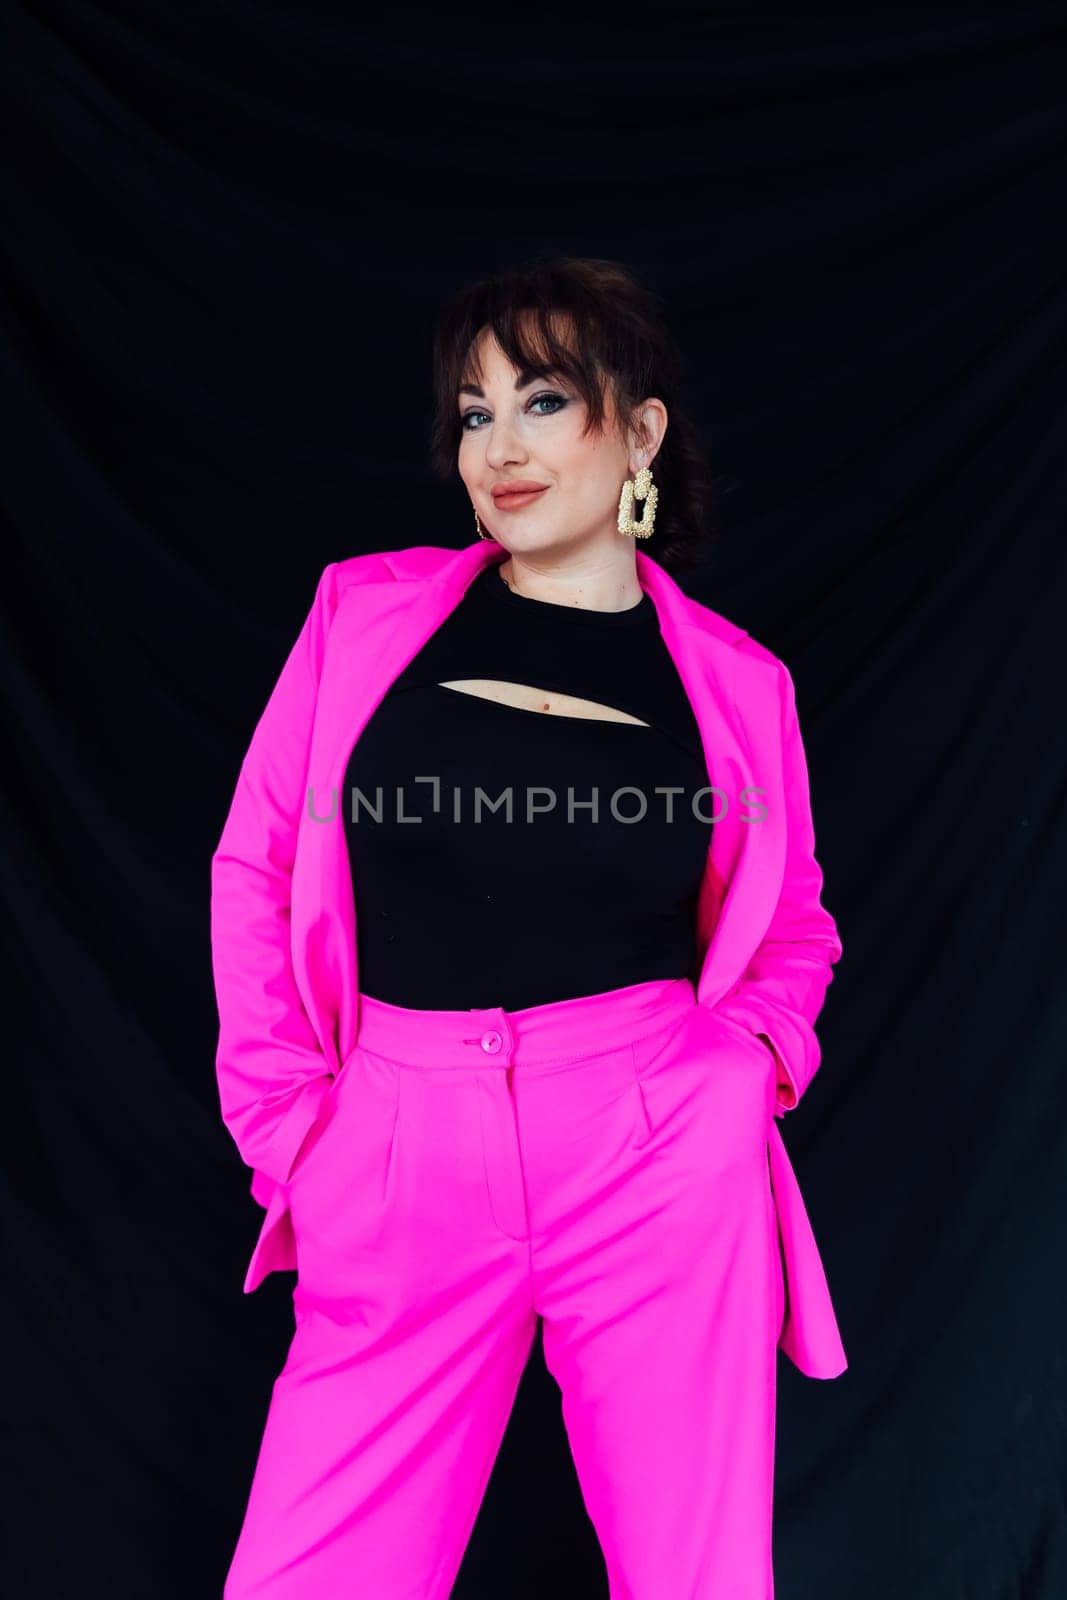 Woman in bright suit posing on black background in studio